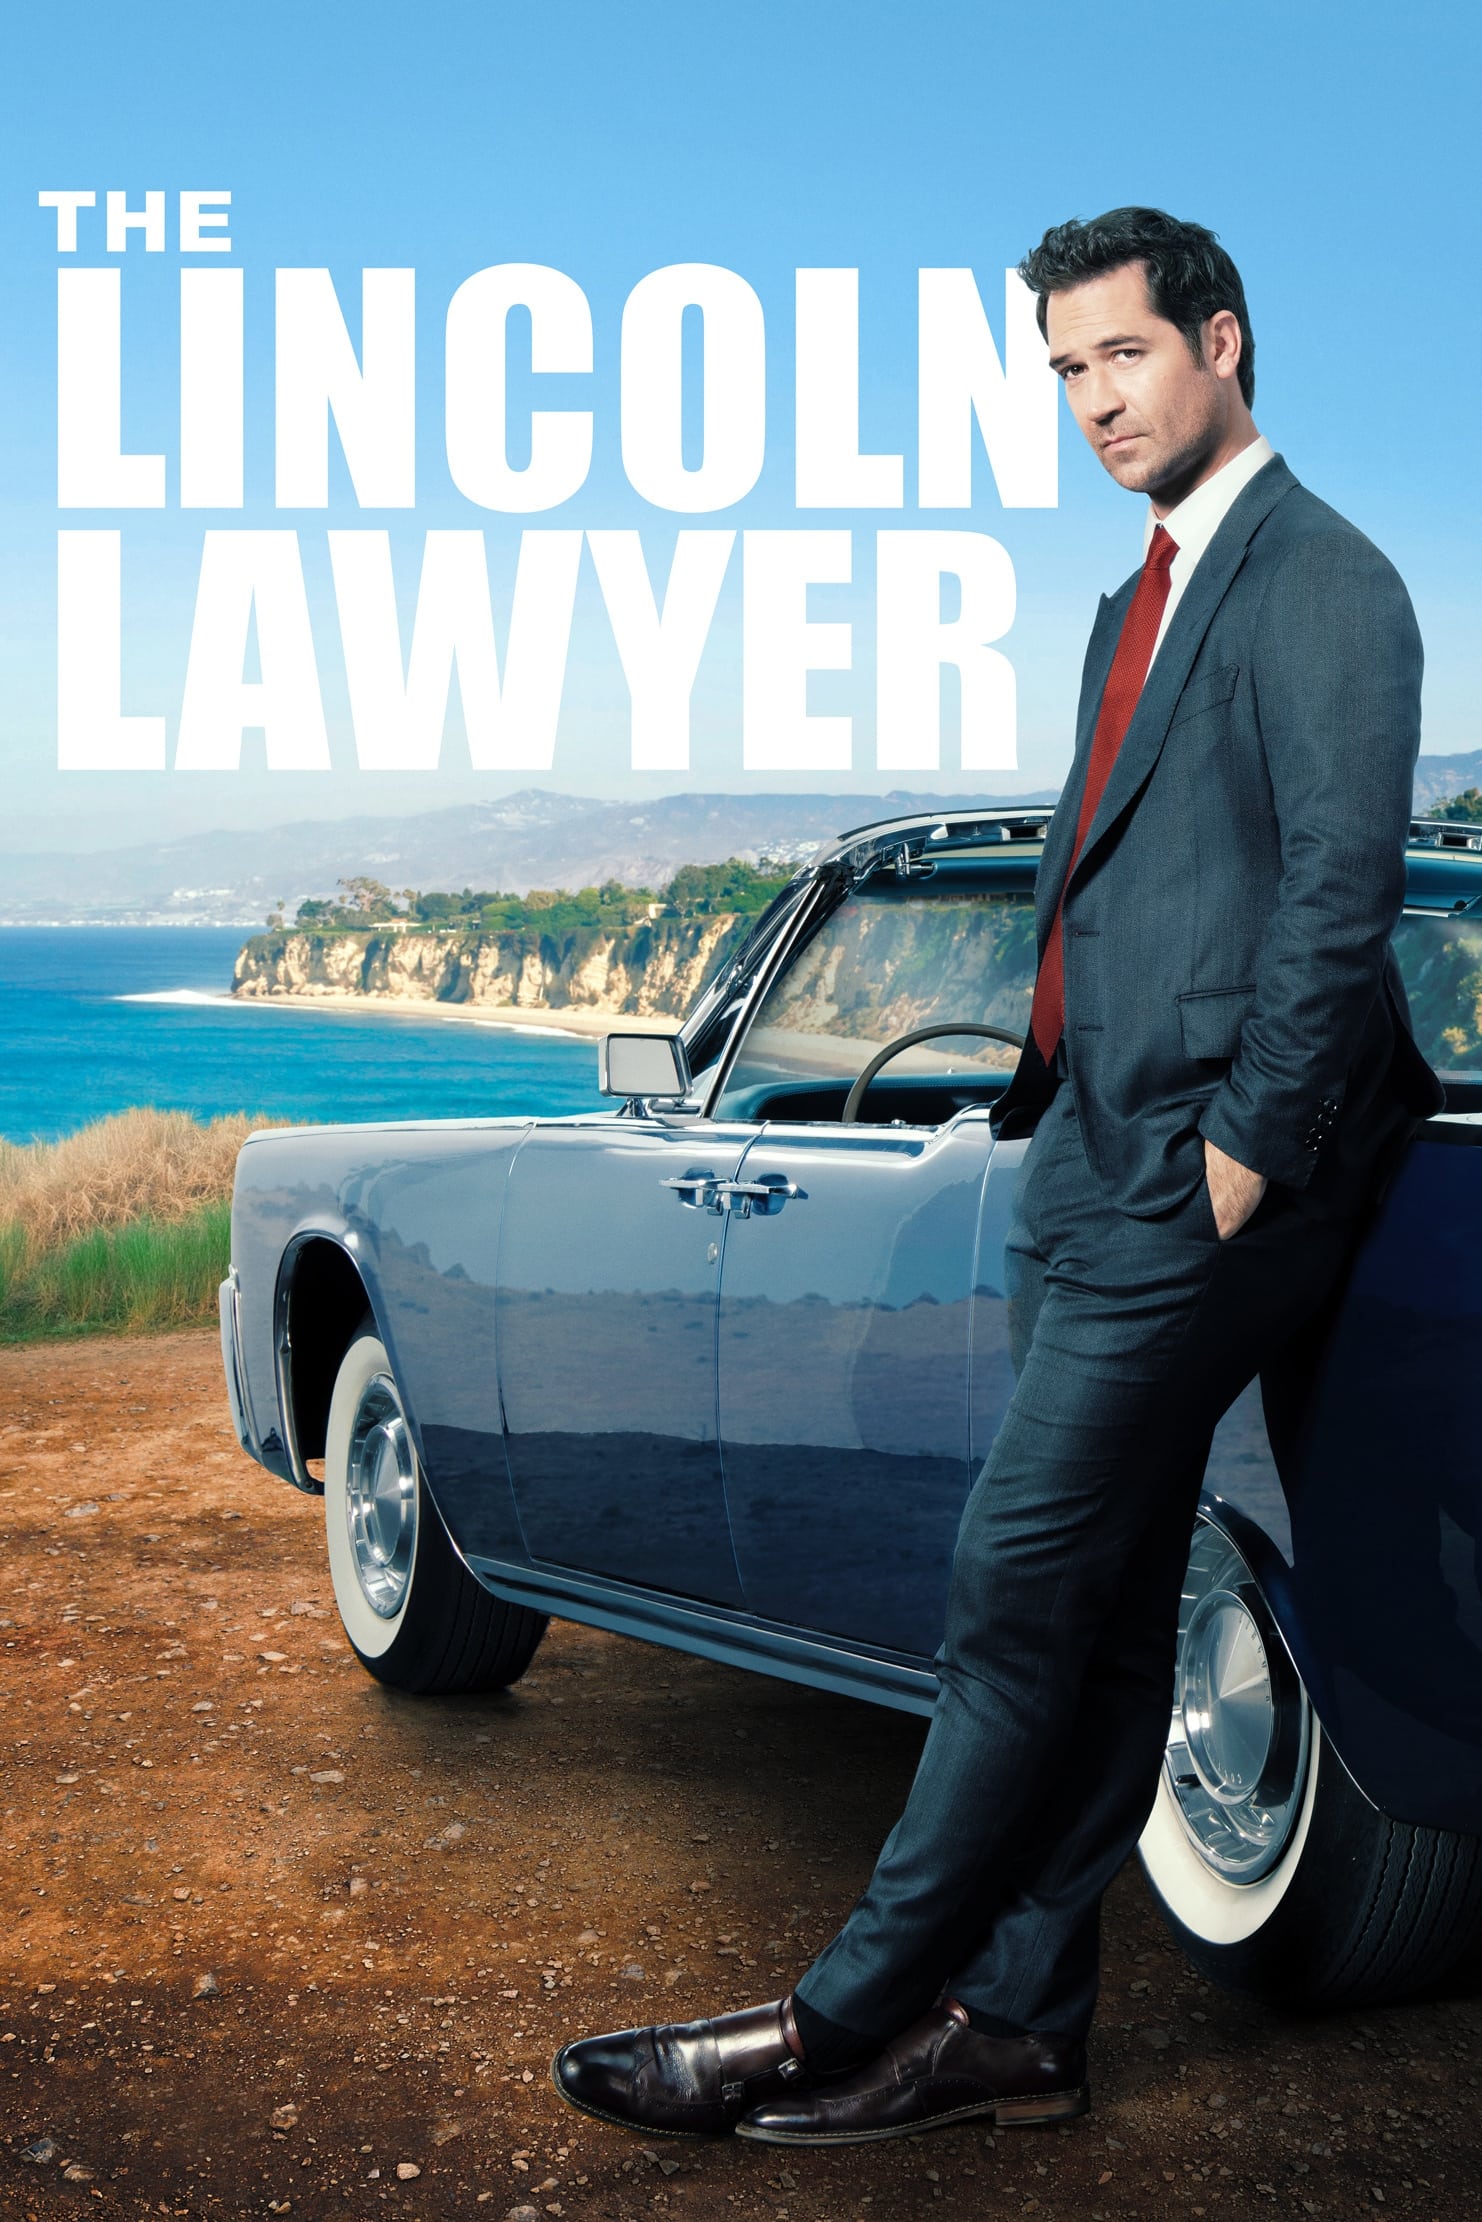 The Lincoln Lawyer TV Shows About Courtroom